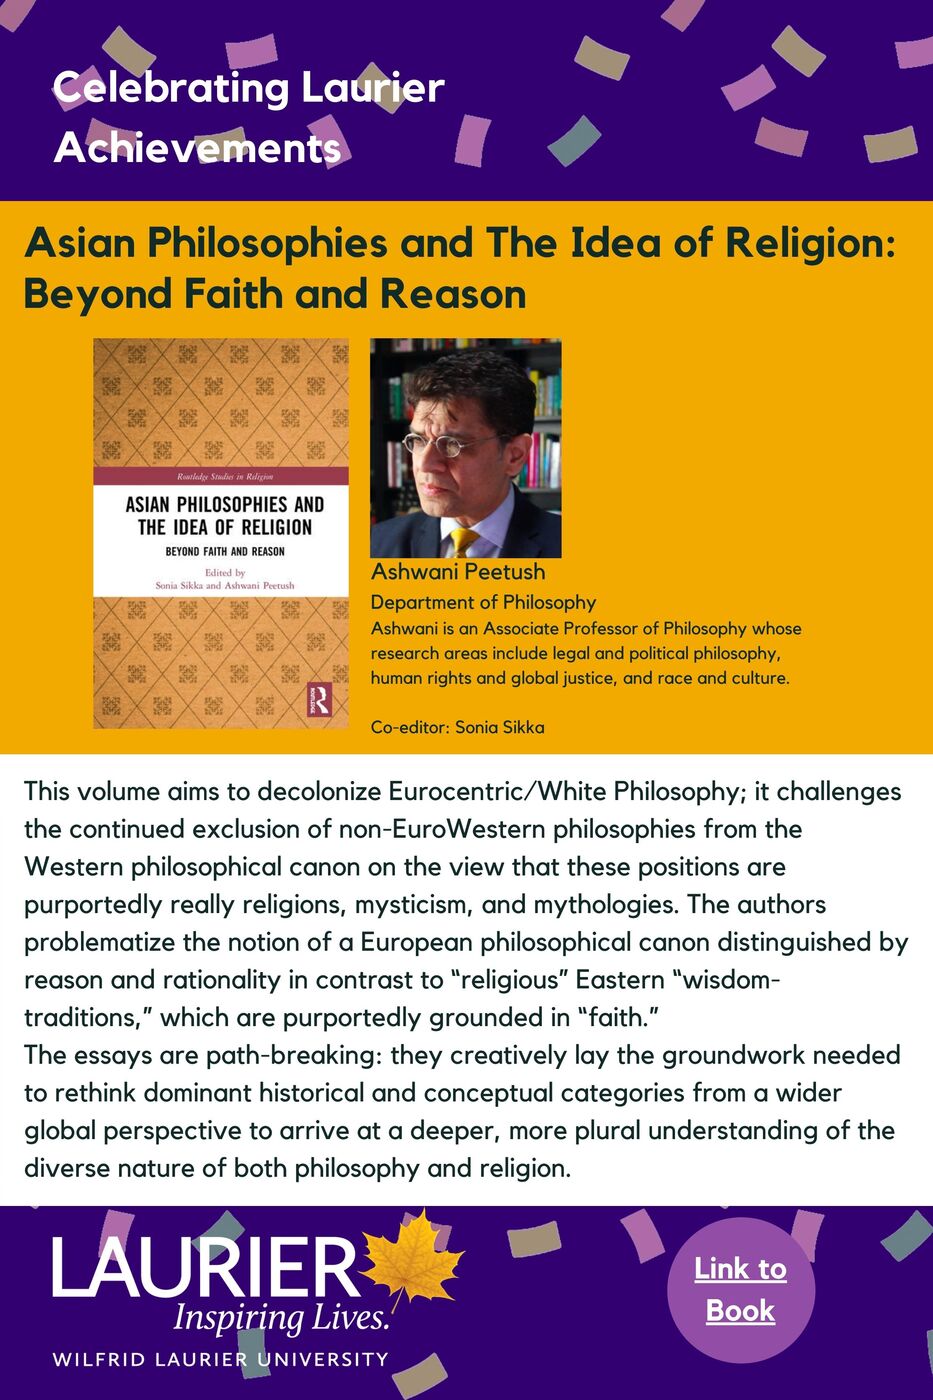 Asian Philosophies and The Idea of Religion: Beyond Faith and Reason promotional poster for the Celebrating Laurier Achievements program with a headshot of the book's author, Ashwani Peetush. 